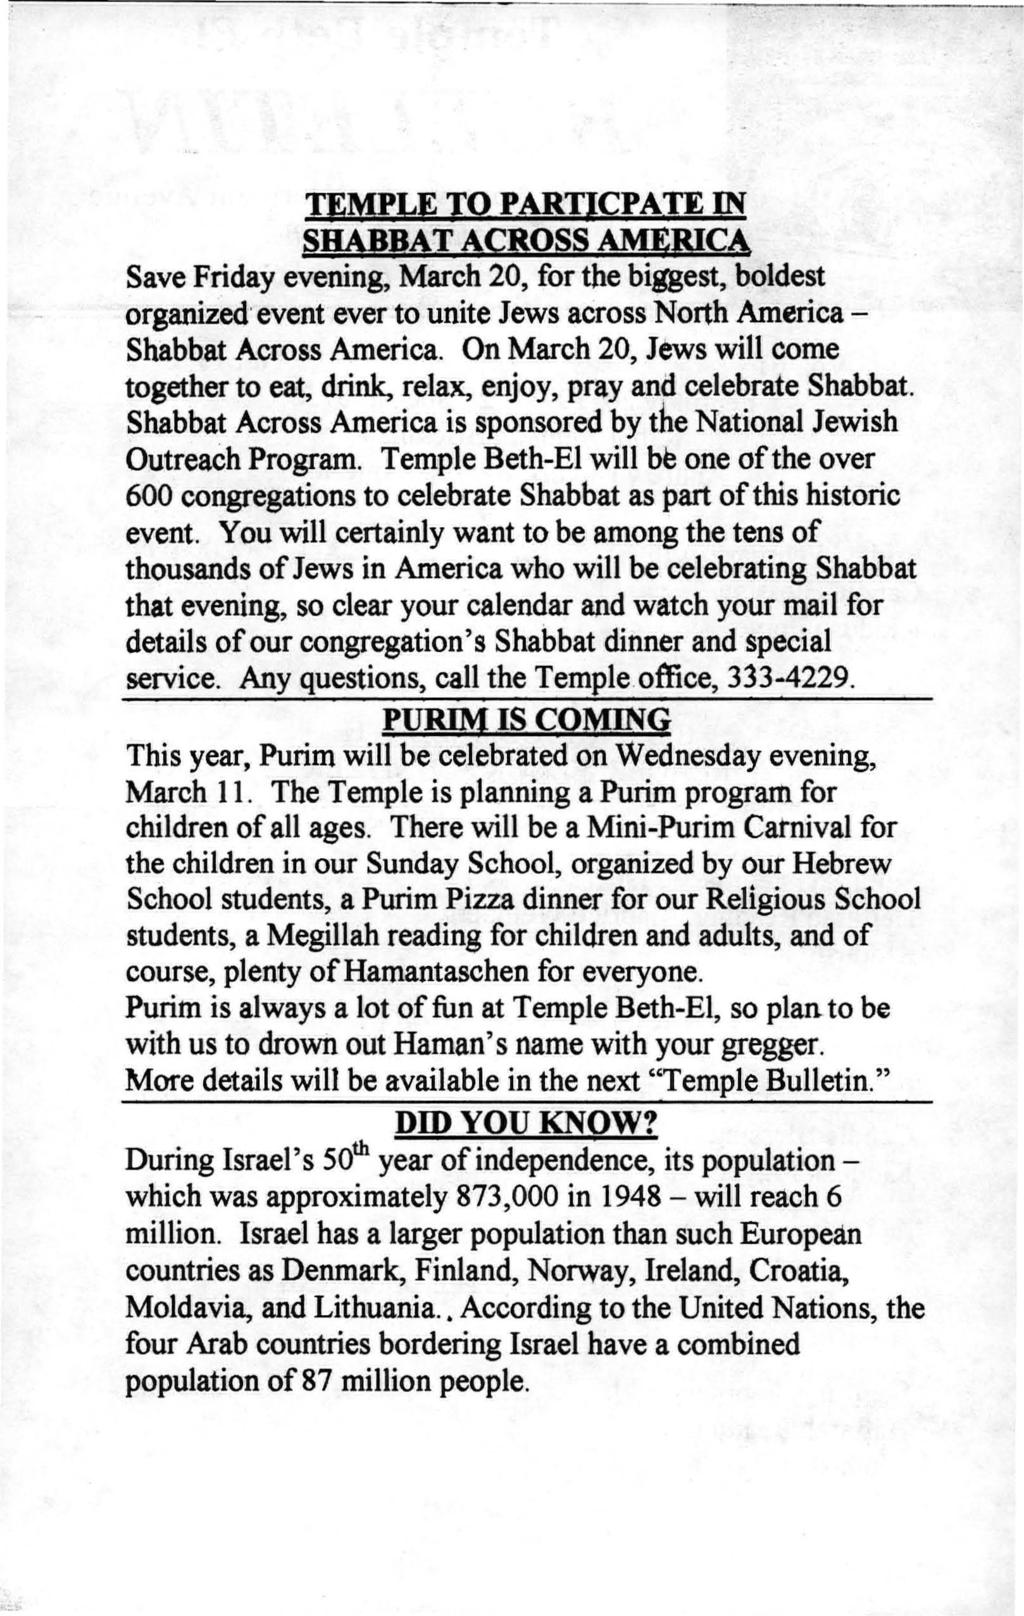 TEMPLE TO PARTICPATE IN SRADBAT ACROSS AMERICA Save Friday evening, March 20, for the biggest, boldest organized' event ever to unite Jews across North America - Shabbat Across America.